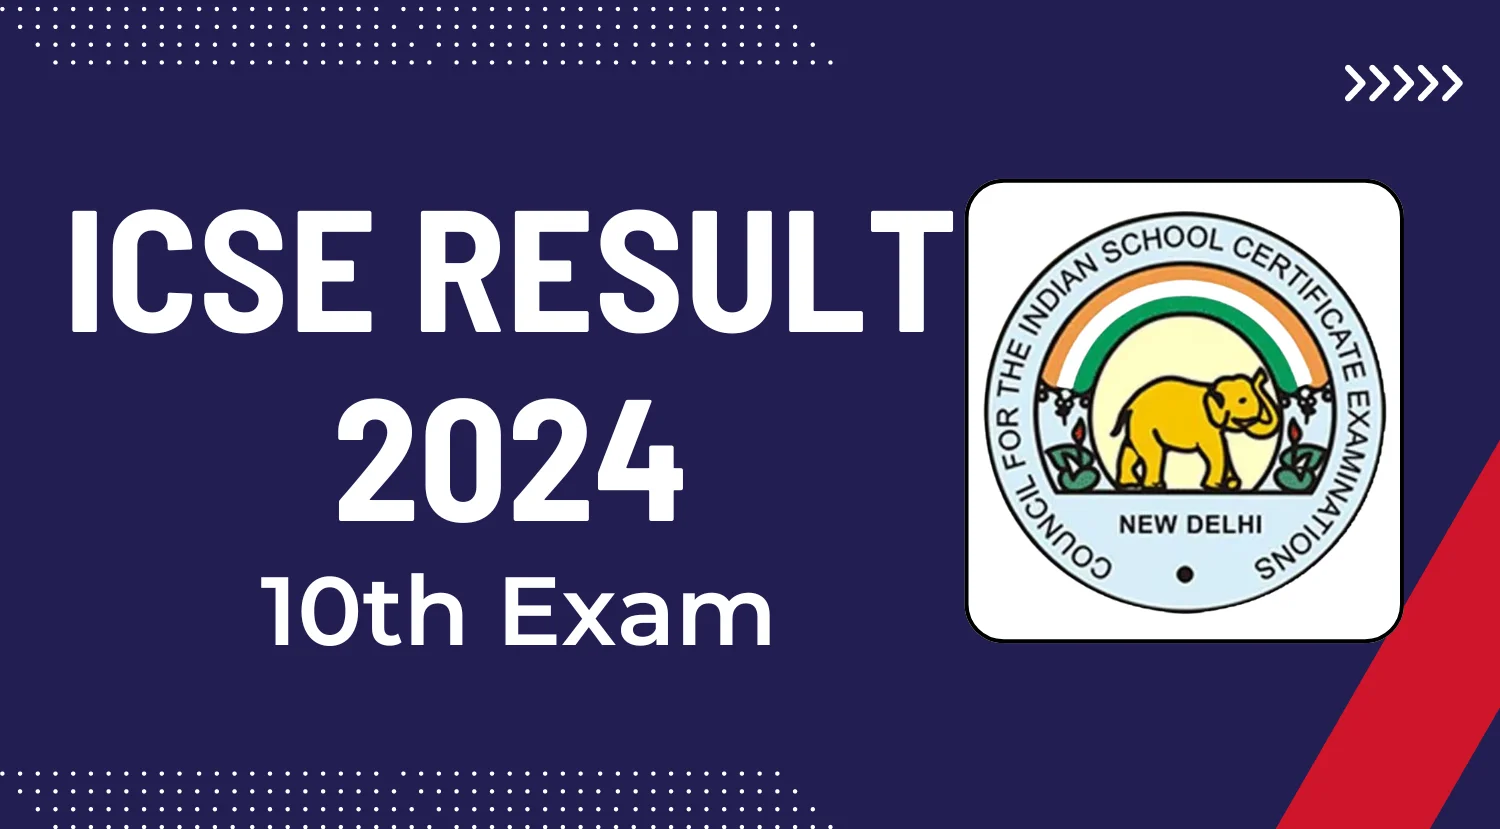 ICSE Result 2024 for 10th Exam Result Download Link Given Here